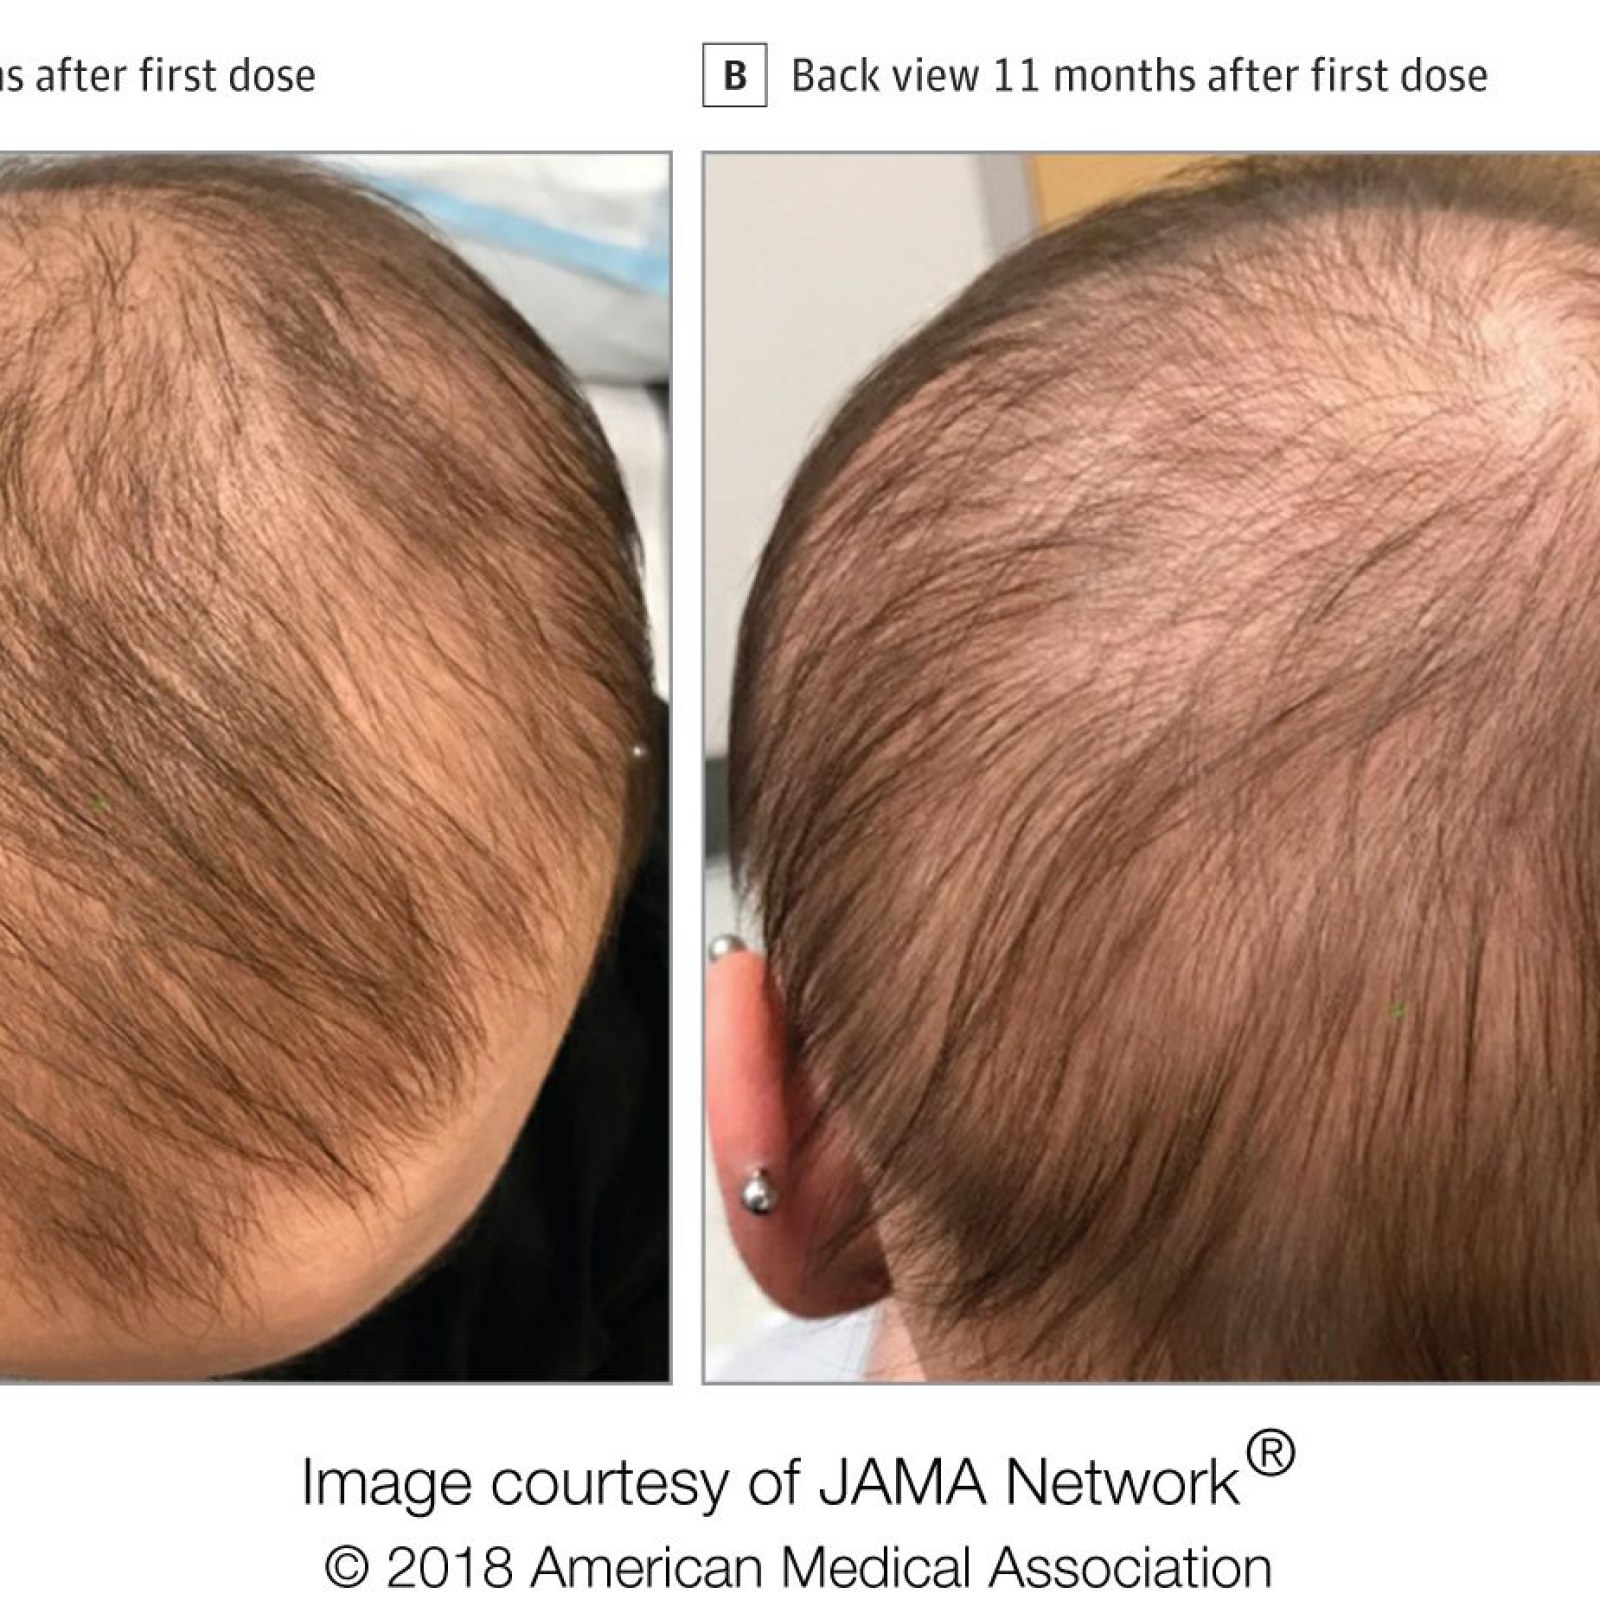 FDA-approved Eczema Drug Dupixent Causes Hair Regrowth in Alopecia Sufferer